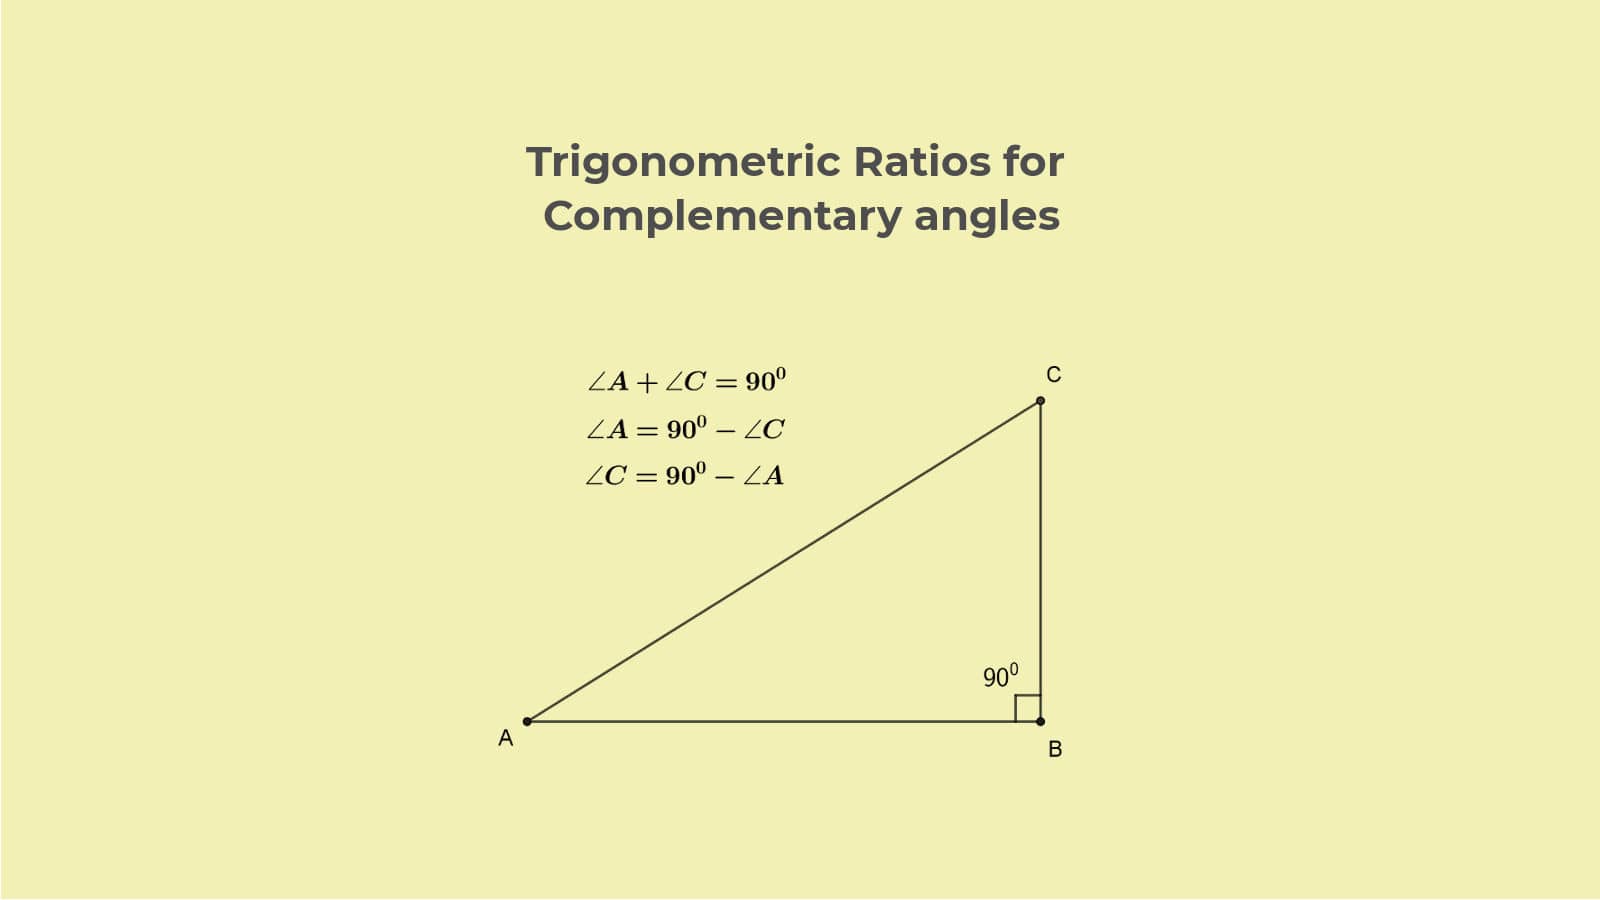 NCERT solutions class 10 trigonometric ratios for complementary angles ex 8.3